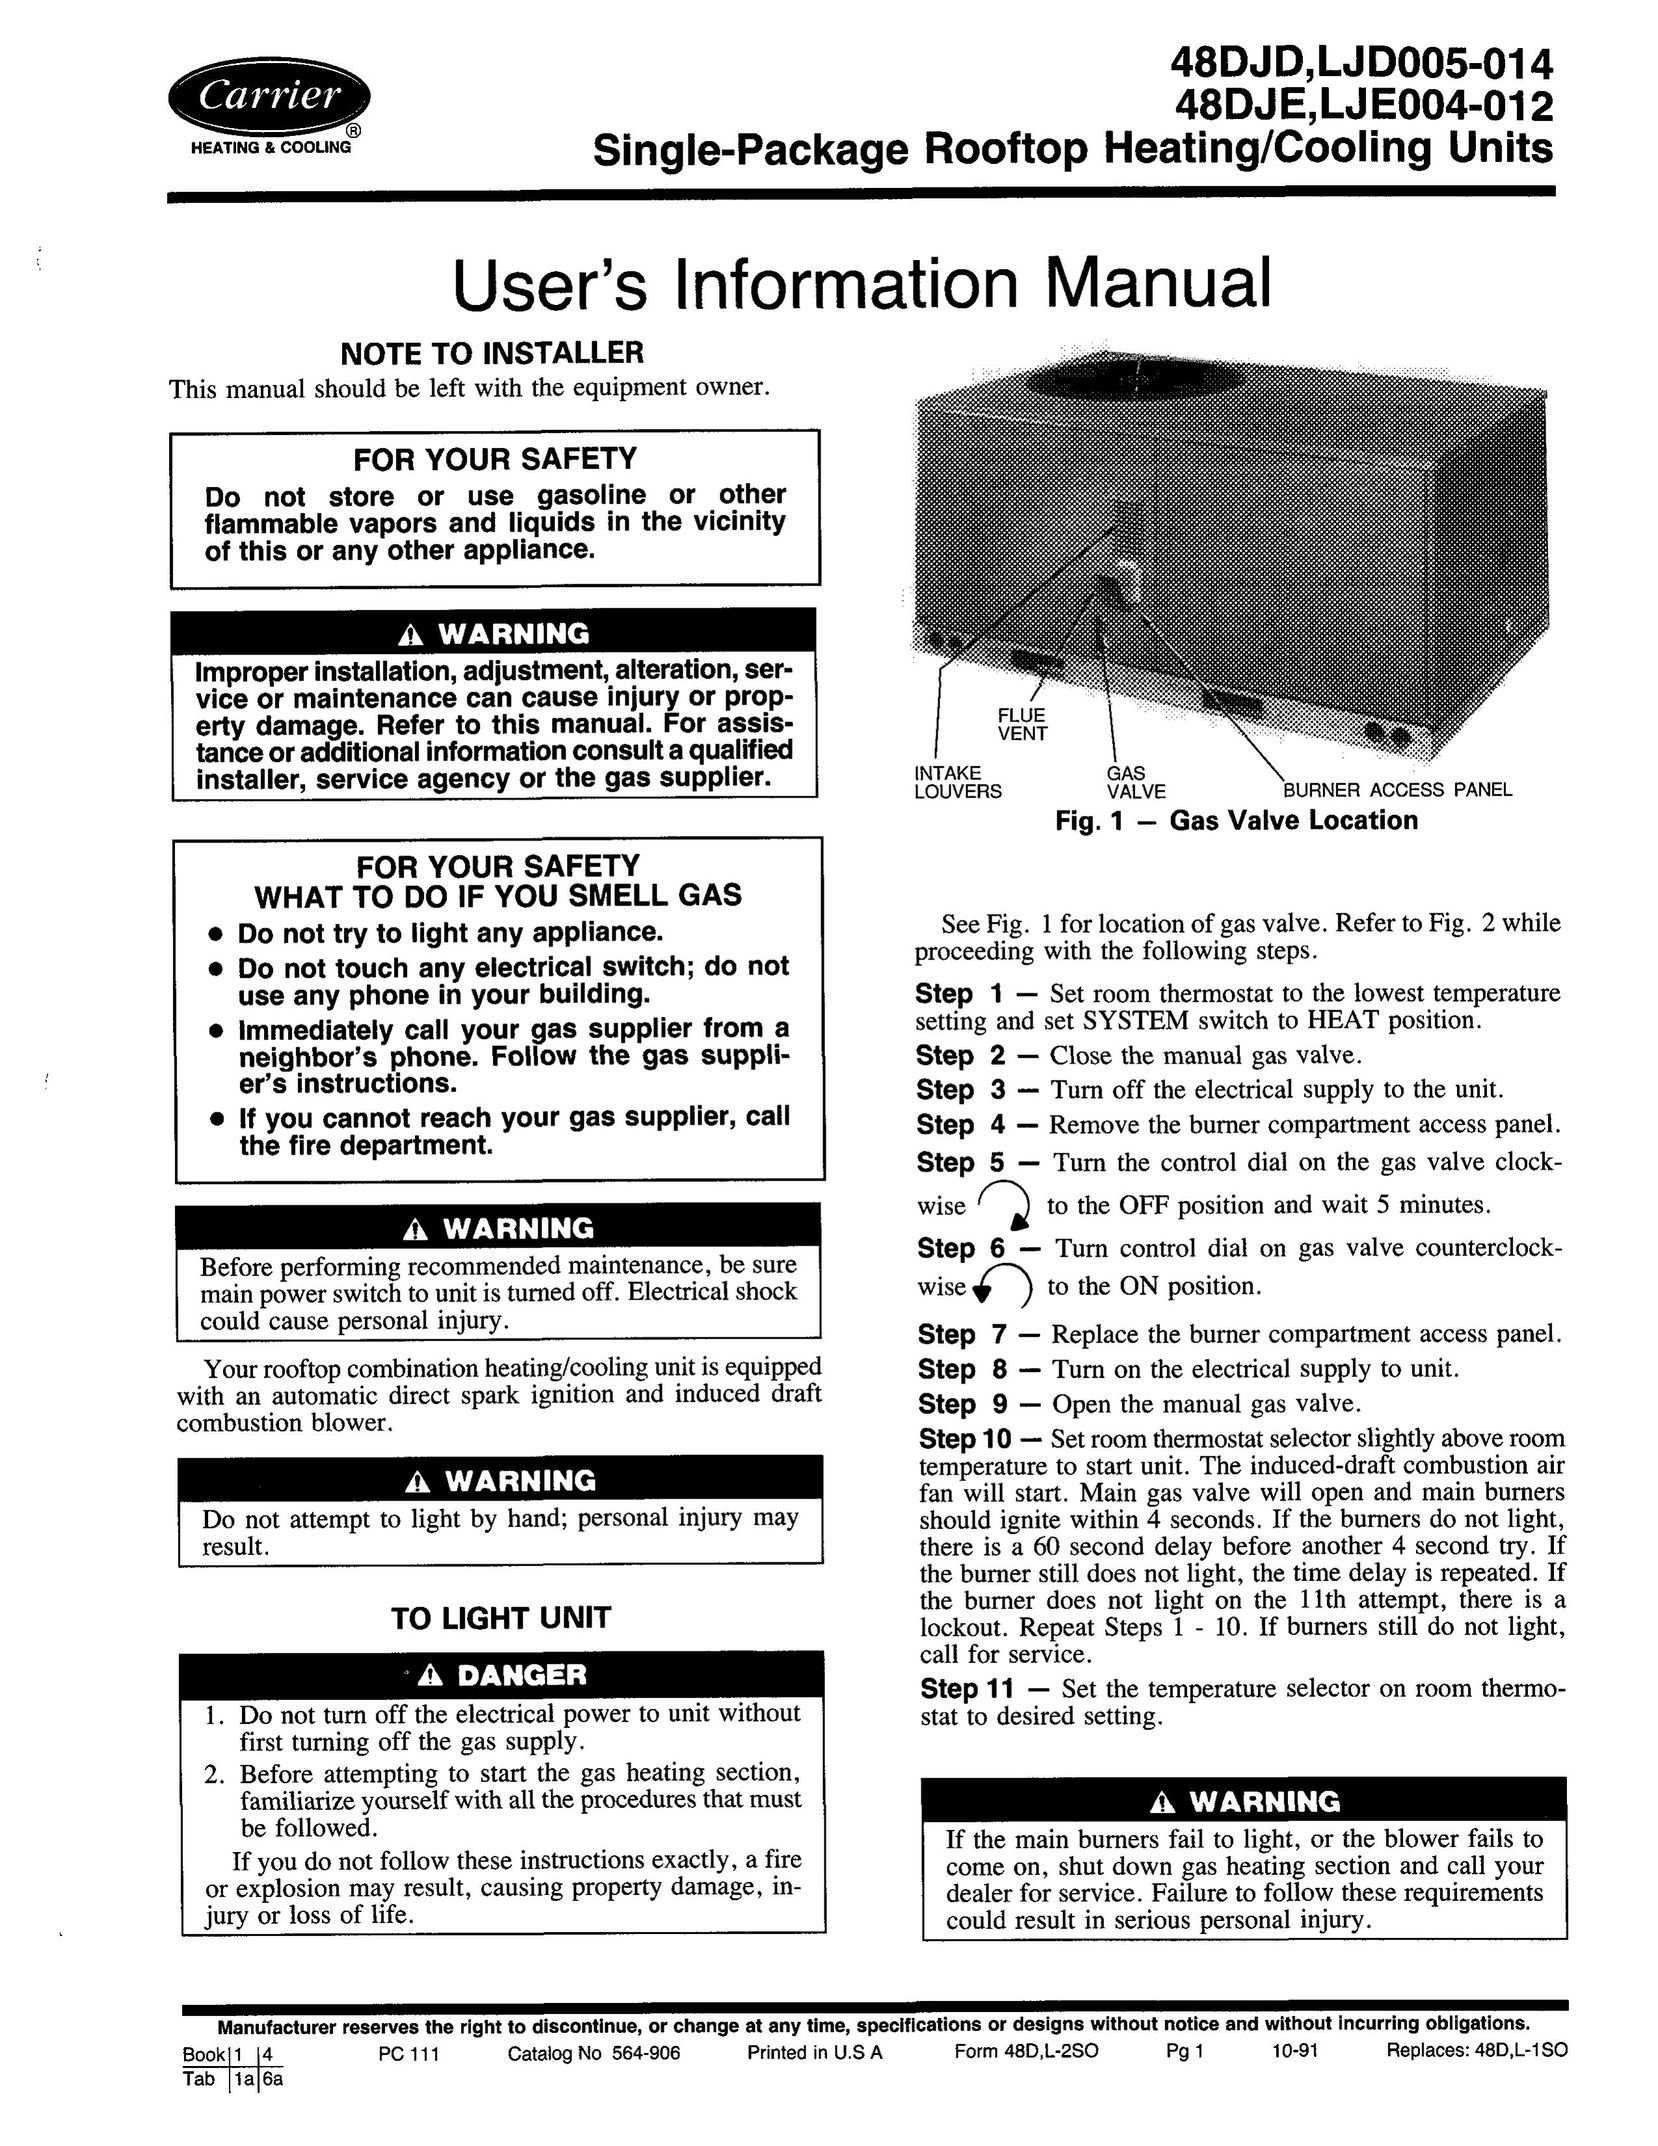 Carrier 48DJE Heating System User Manual